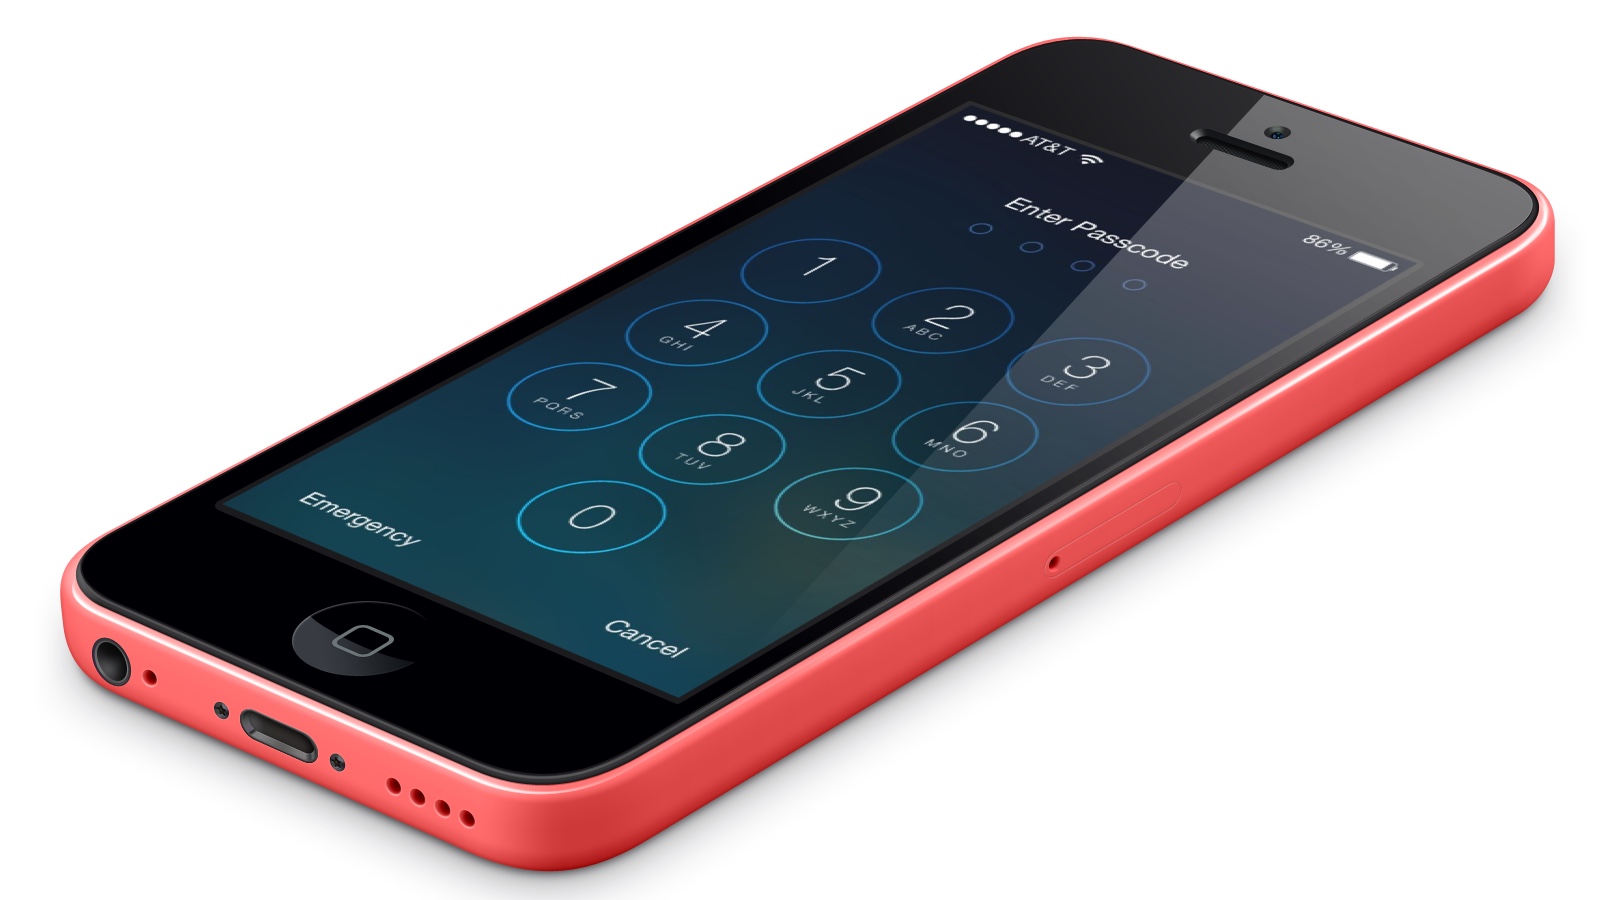 Data Recovery Company DriveSavers Offering iPhone Passcode Lockout Service to Consumers